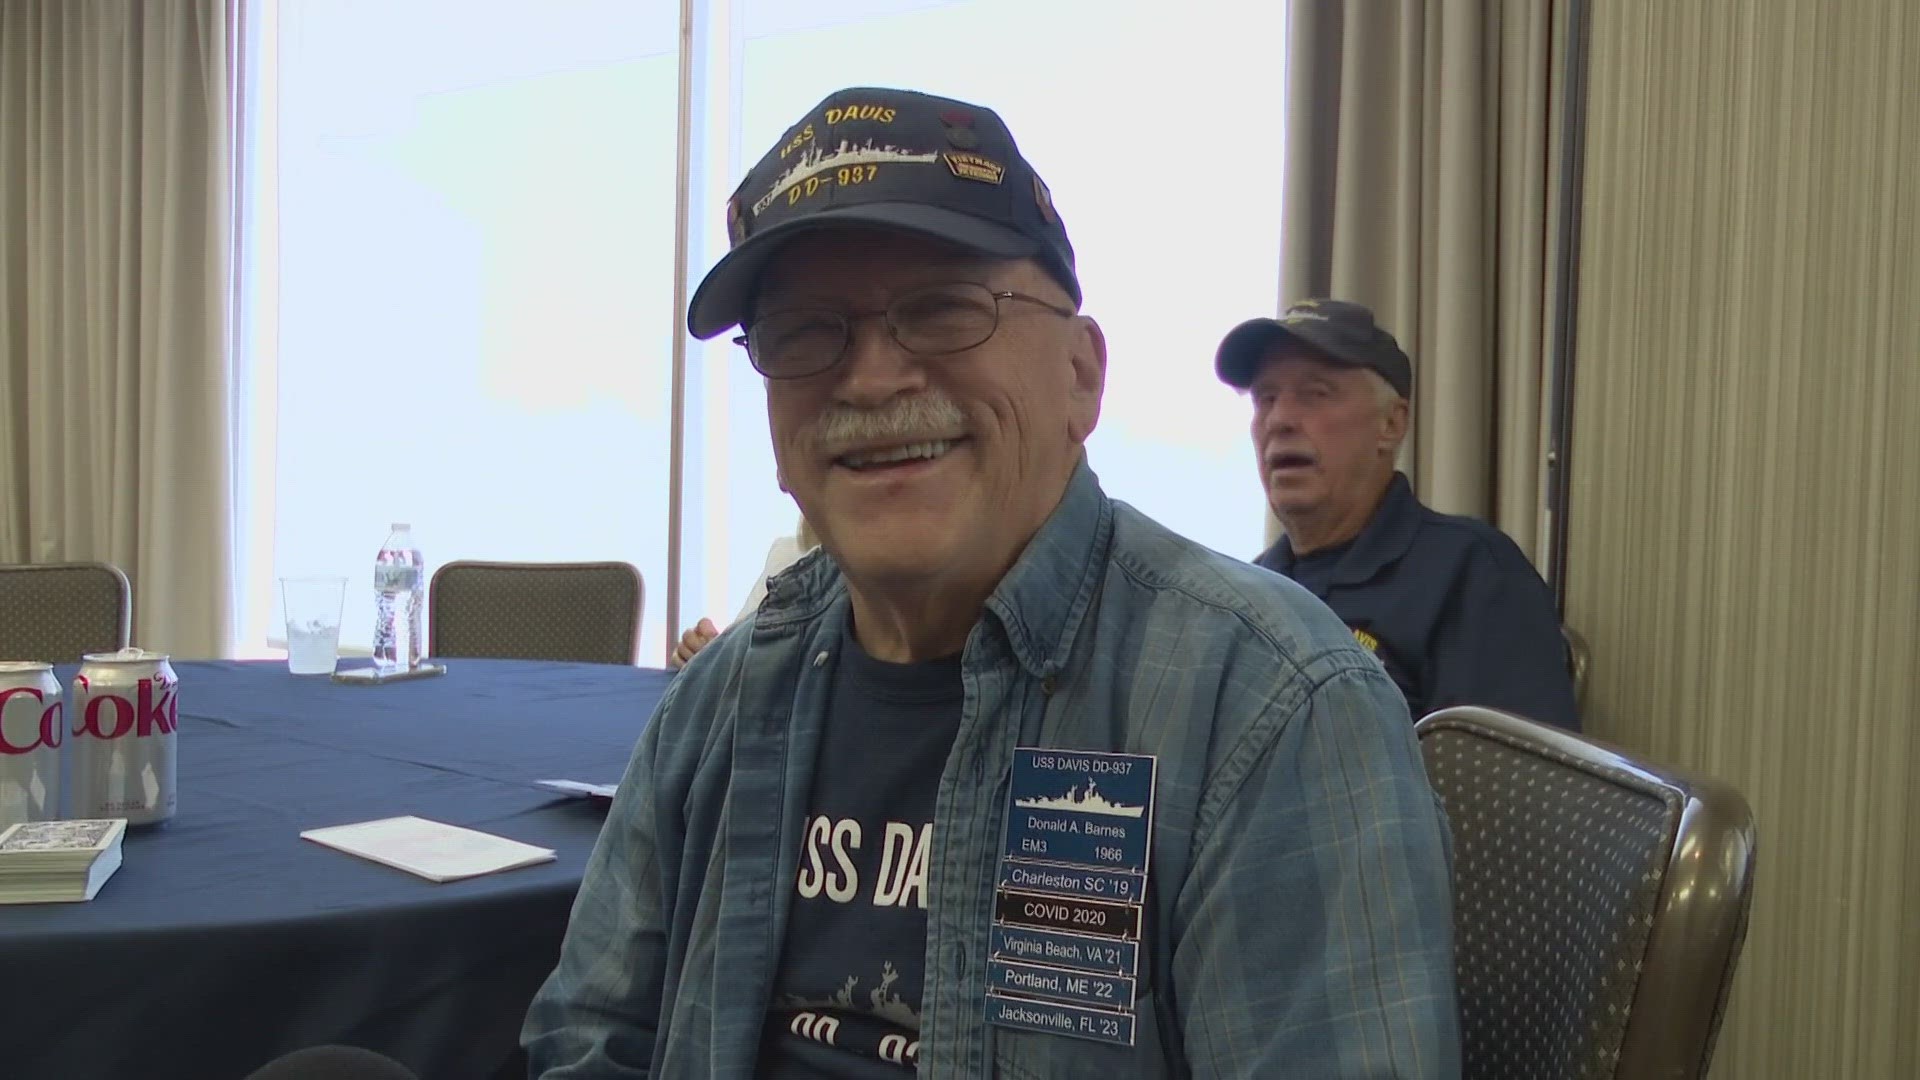 Donald Barnes says sailors were firing "day and night" on the firing line aboard the USS Davis to support ground troops.